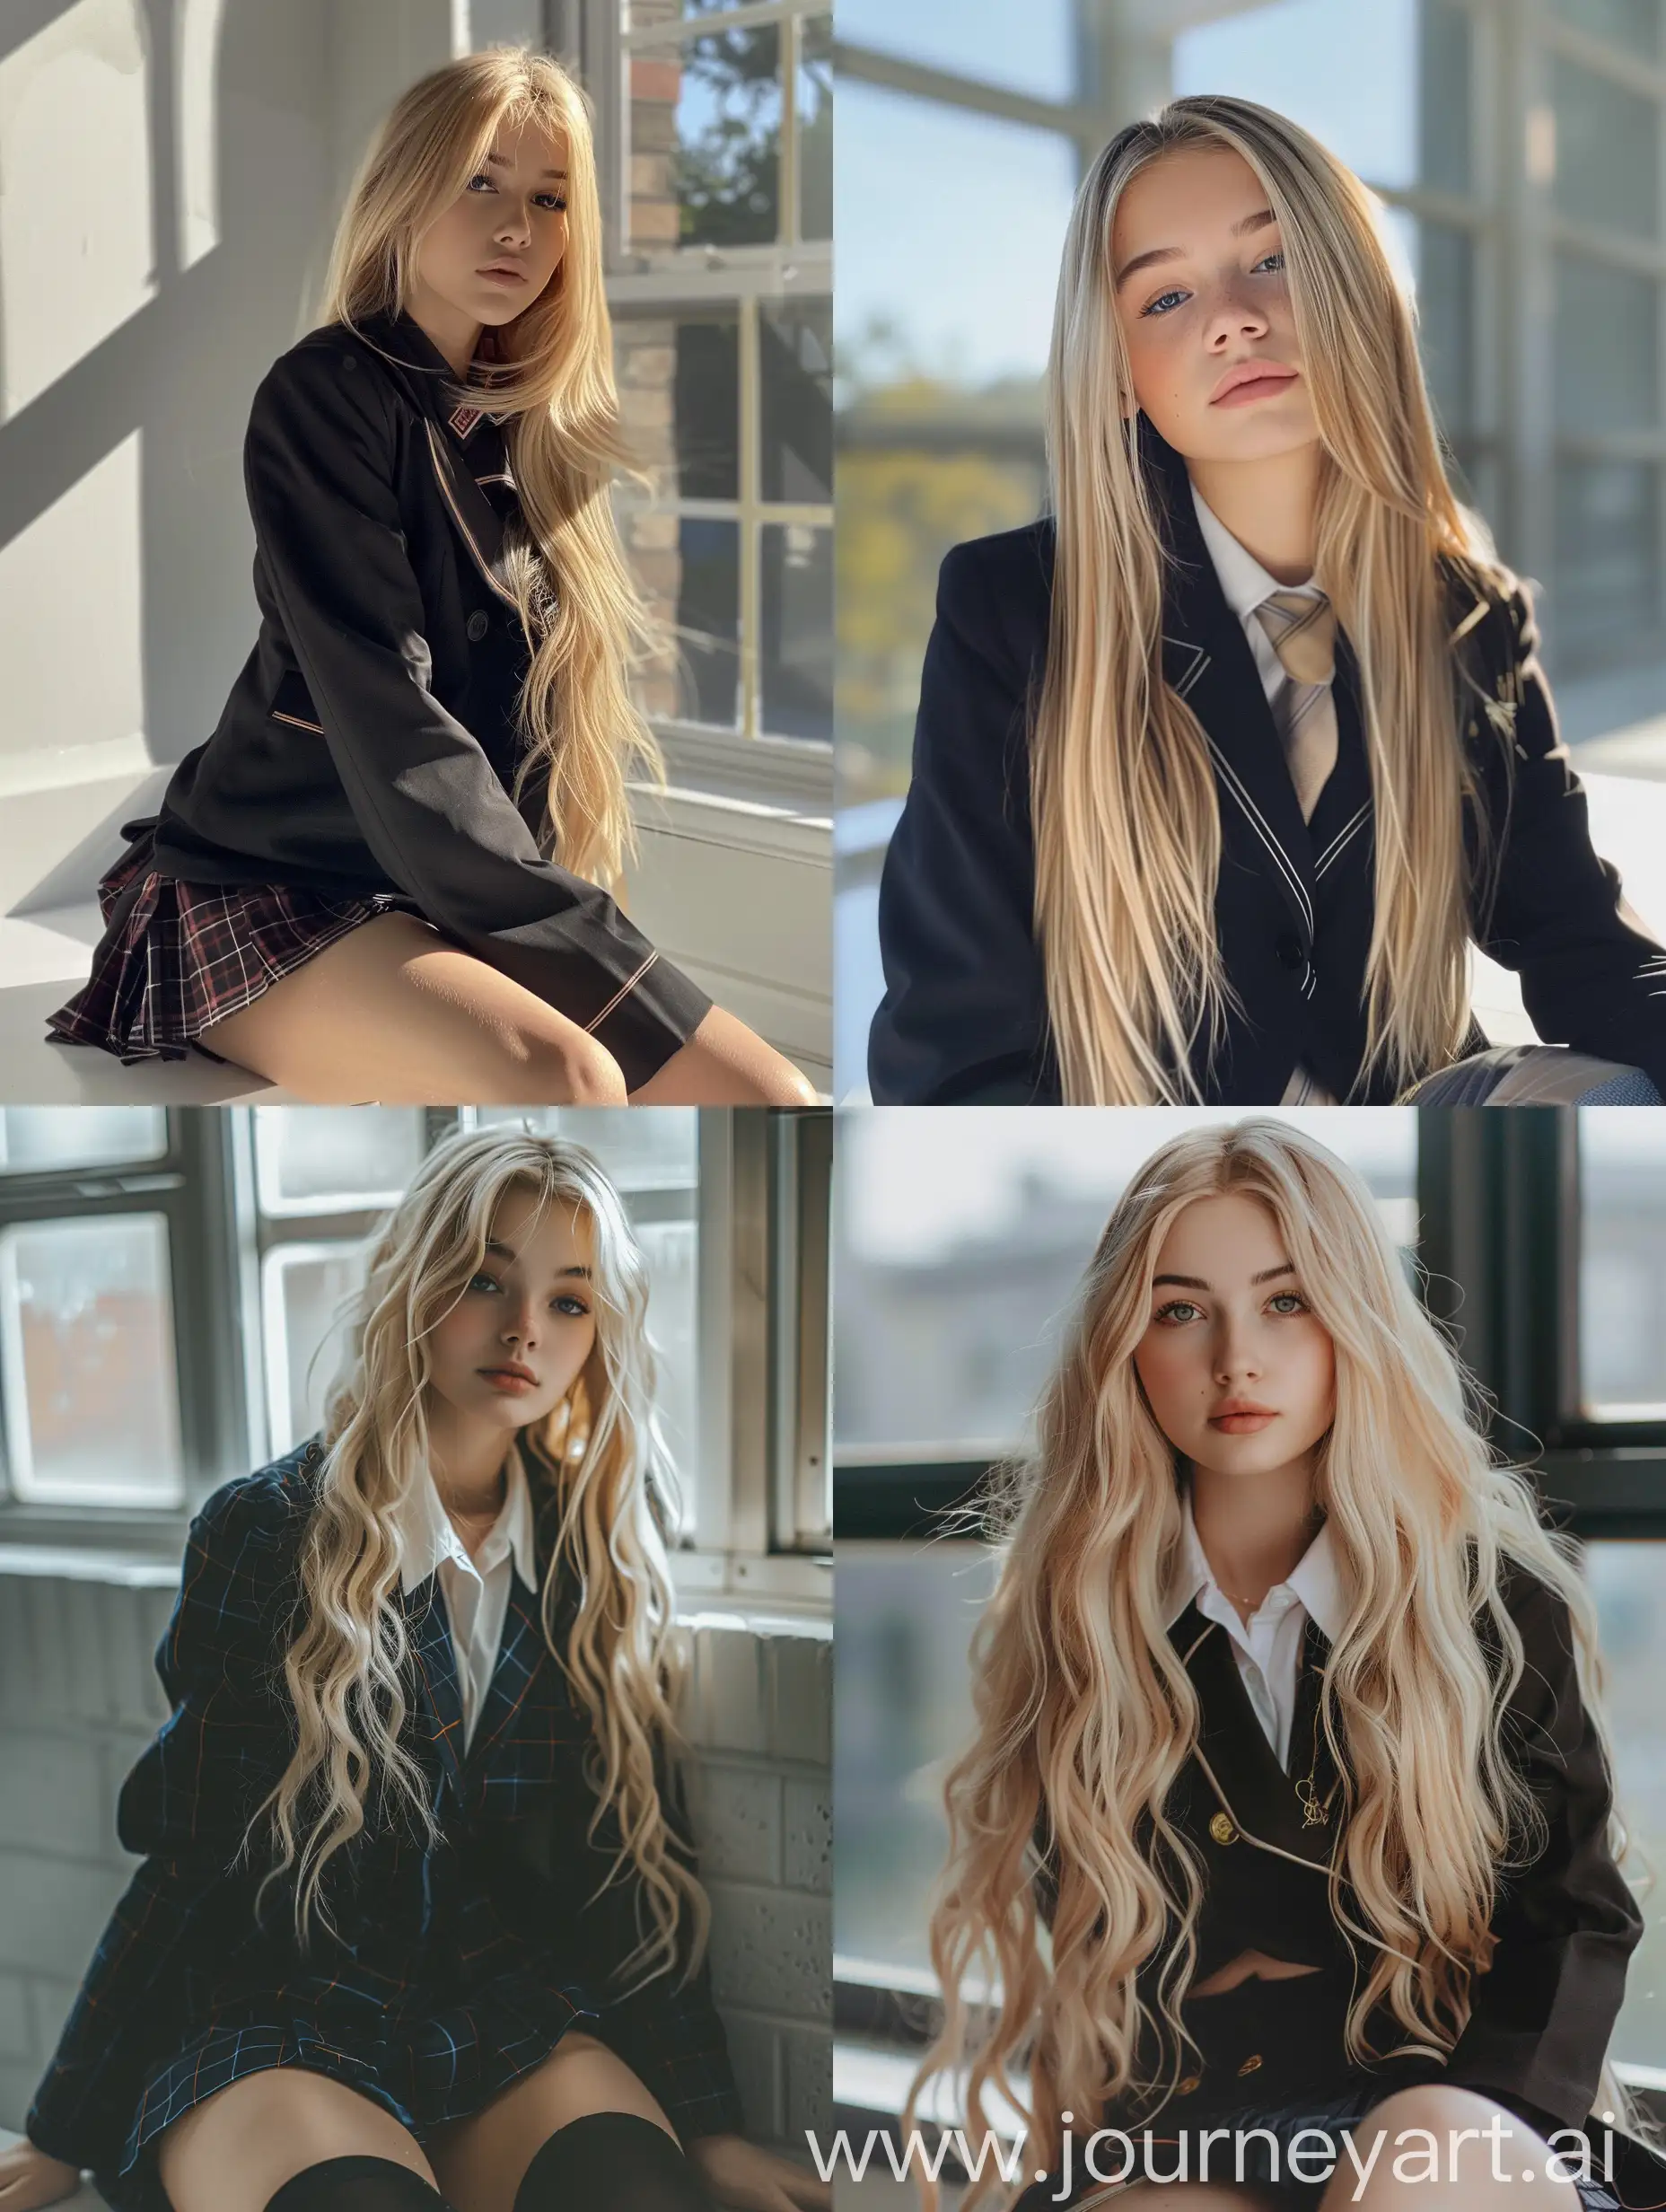 1 girl, long blond hair, 18 years old, influencer, beauty,   in the school, school uniform, makeup, , fullbody, fitness, sitting, , , down view